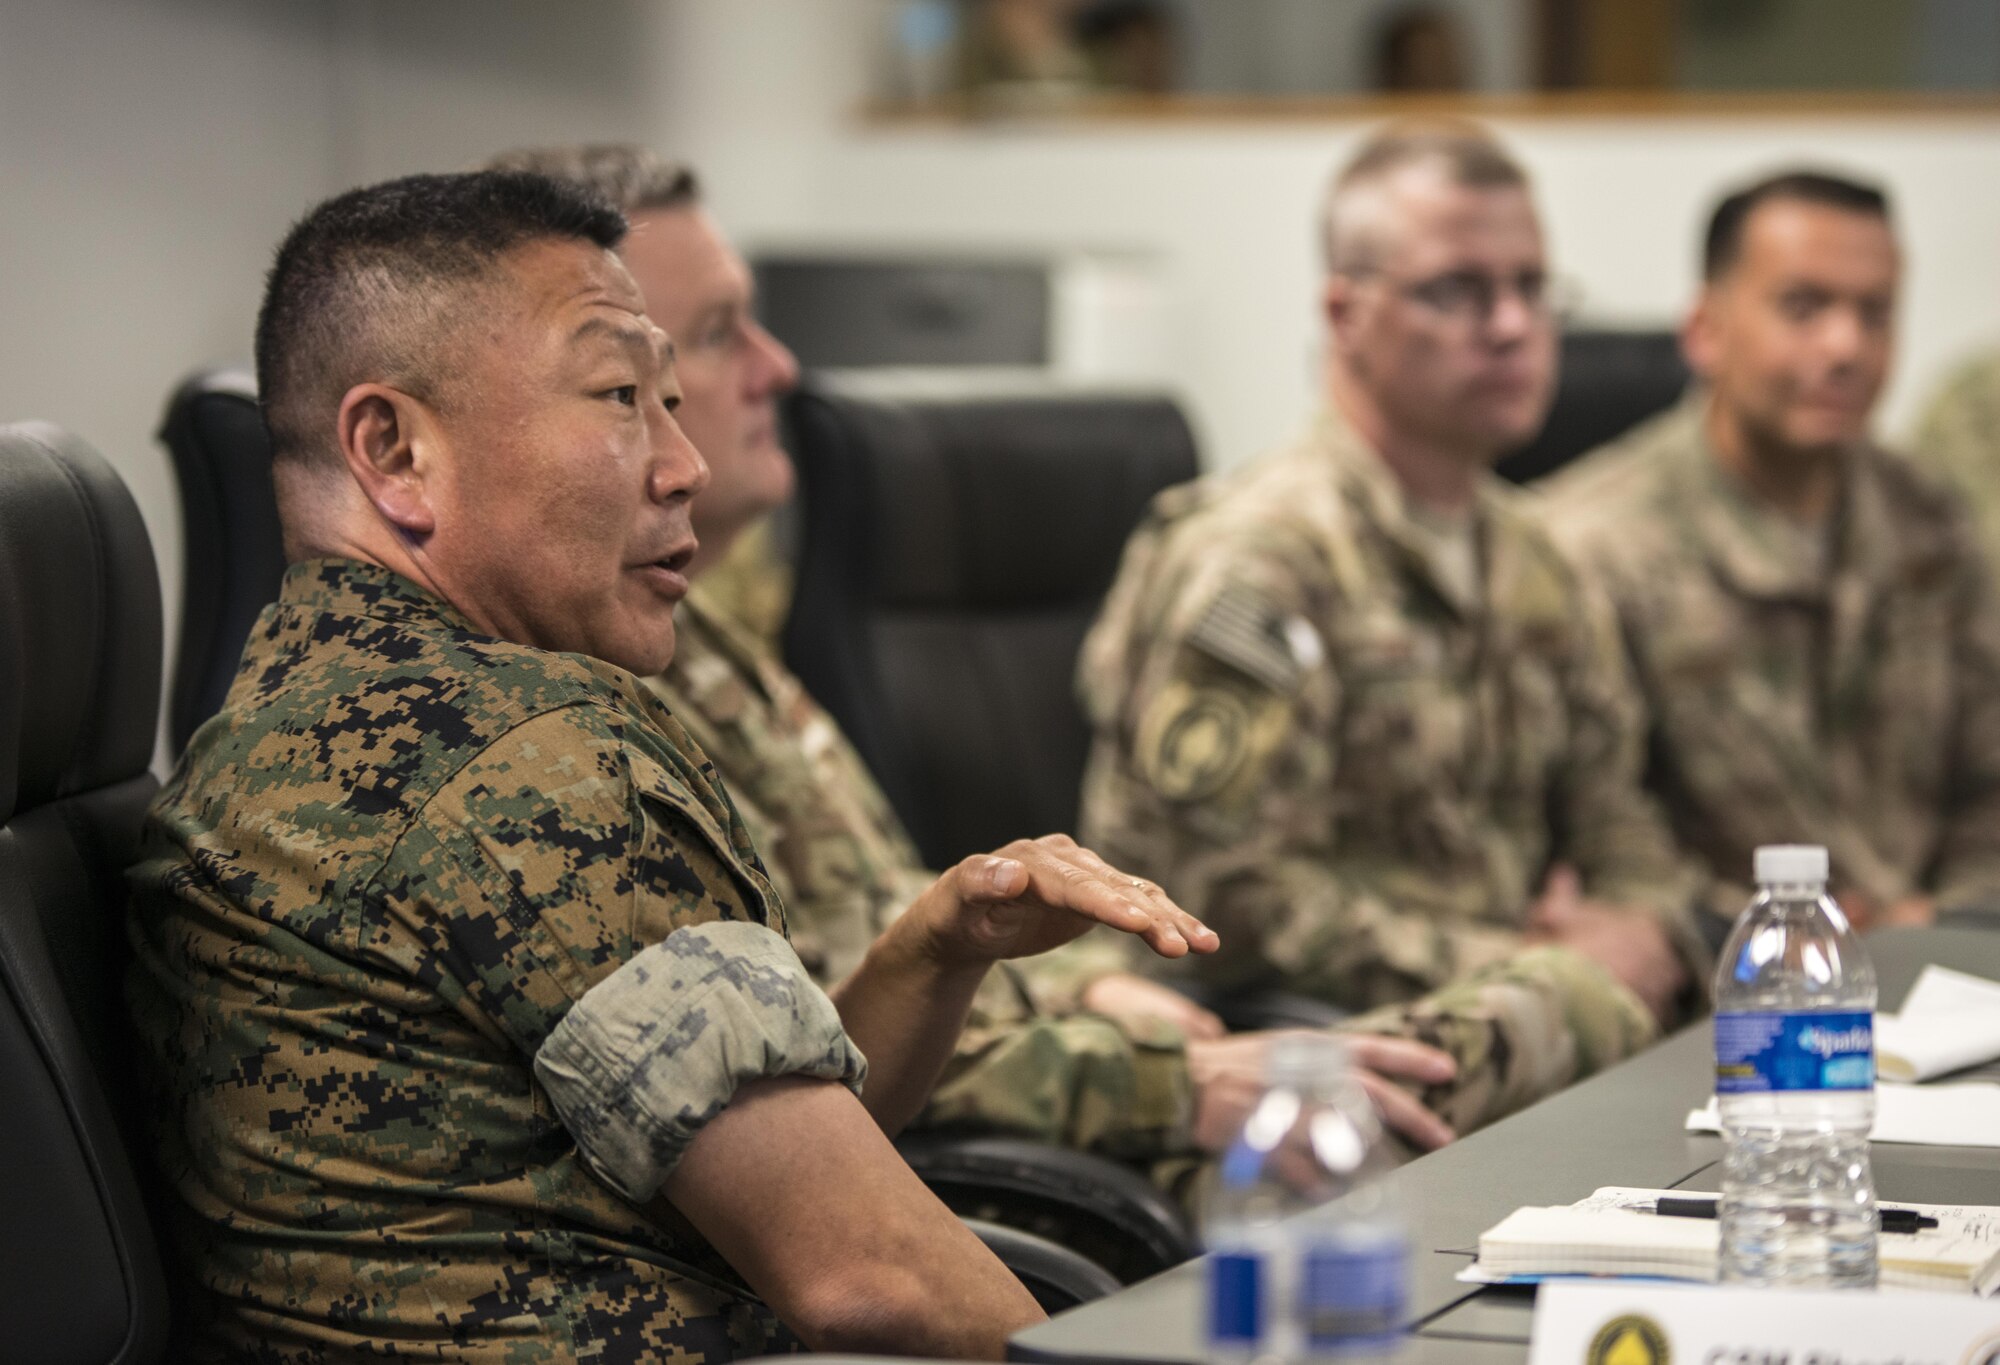 U.S. Marine Corps Maj. Gen. Daniel Yoo, commander of Special Operations Command Pacific visited the 353rd Special Operations Group June 19, 2017 at Kadena Air Base, Okinawa, Japan. Traveling to Pacific, Yoo was honored as a distinguished guest during the 353rd SOG change of command ceremony. (U.S. Air Force photo by Capt. Jessica Tait)